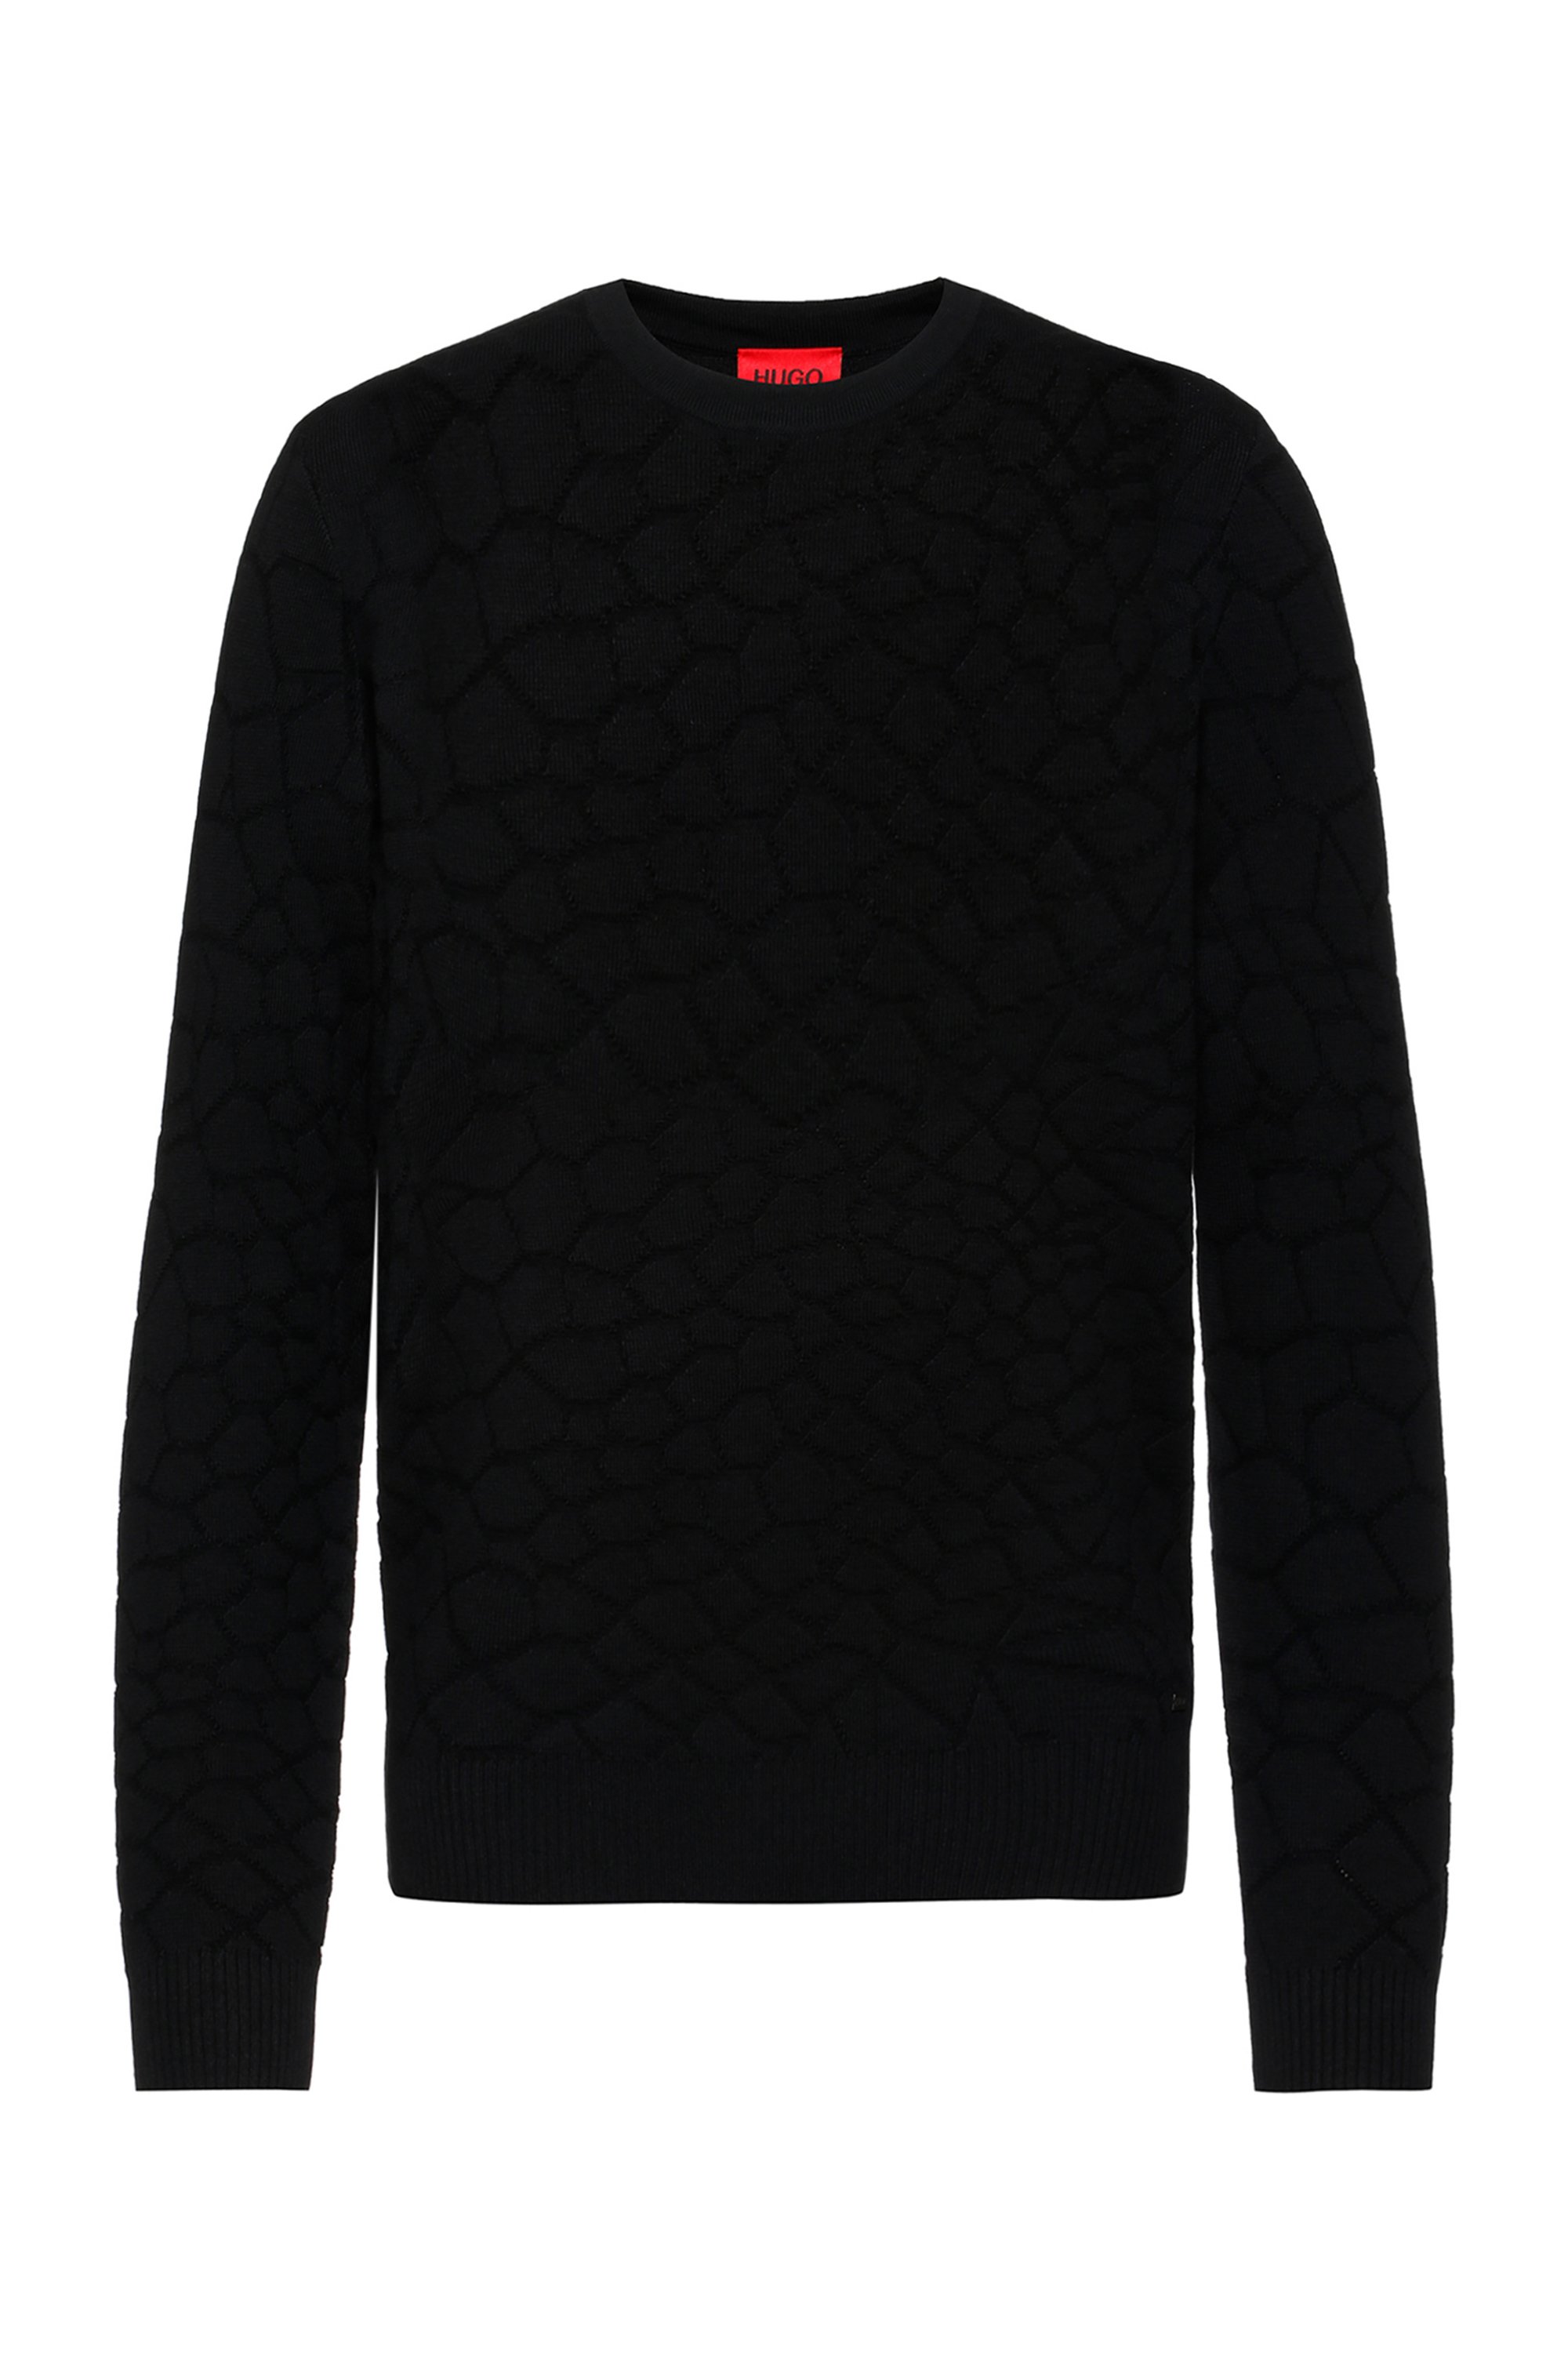 Relaxed-fit cotton-blend sweater with snake motif, Black